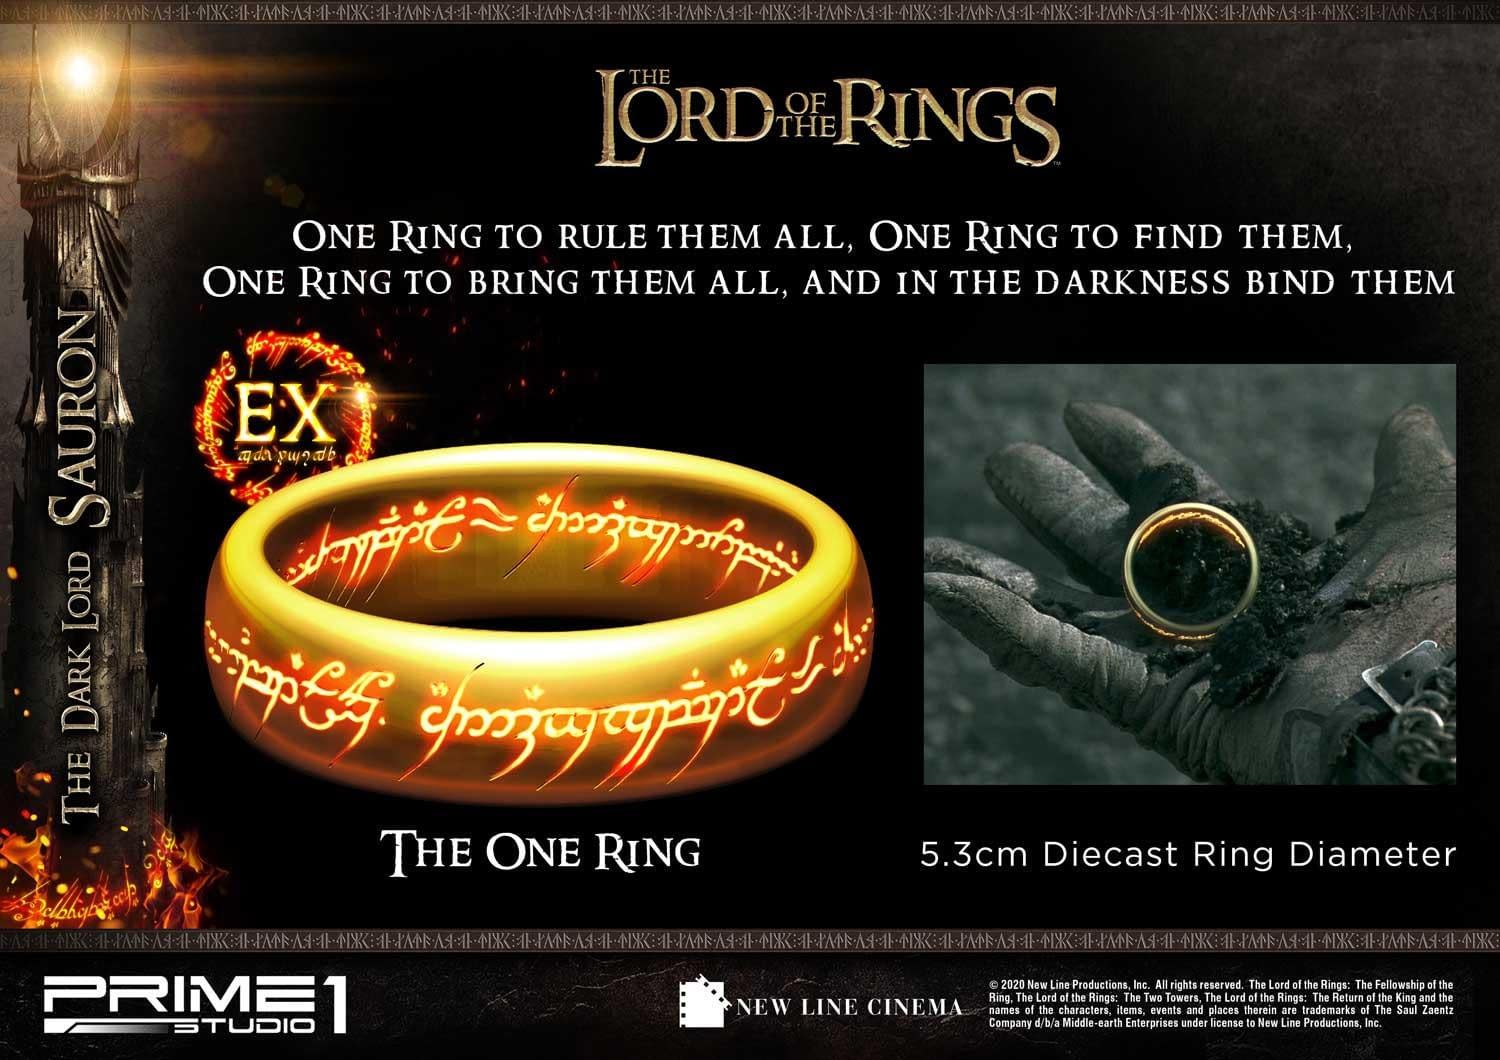 "The Lord of the Rings" Sauron Has Returned with Prime 1 Studio